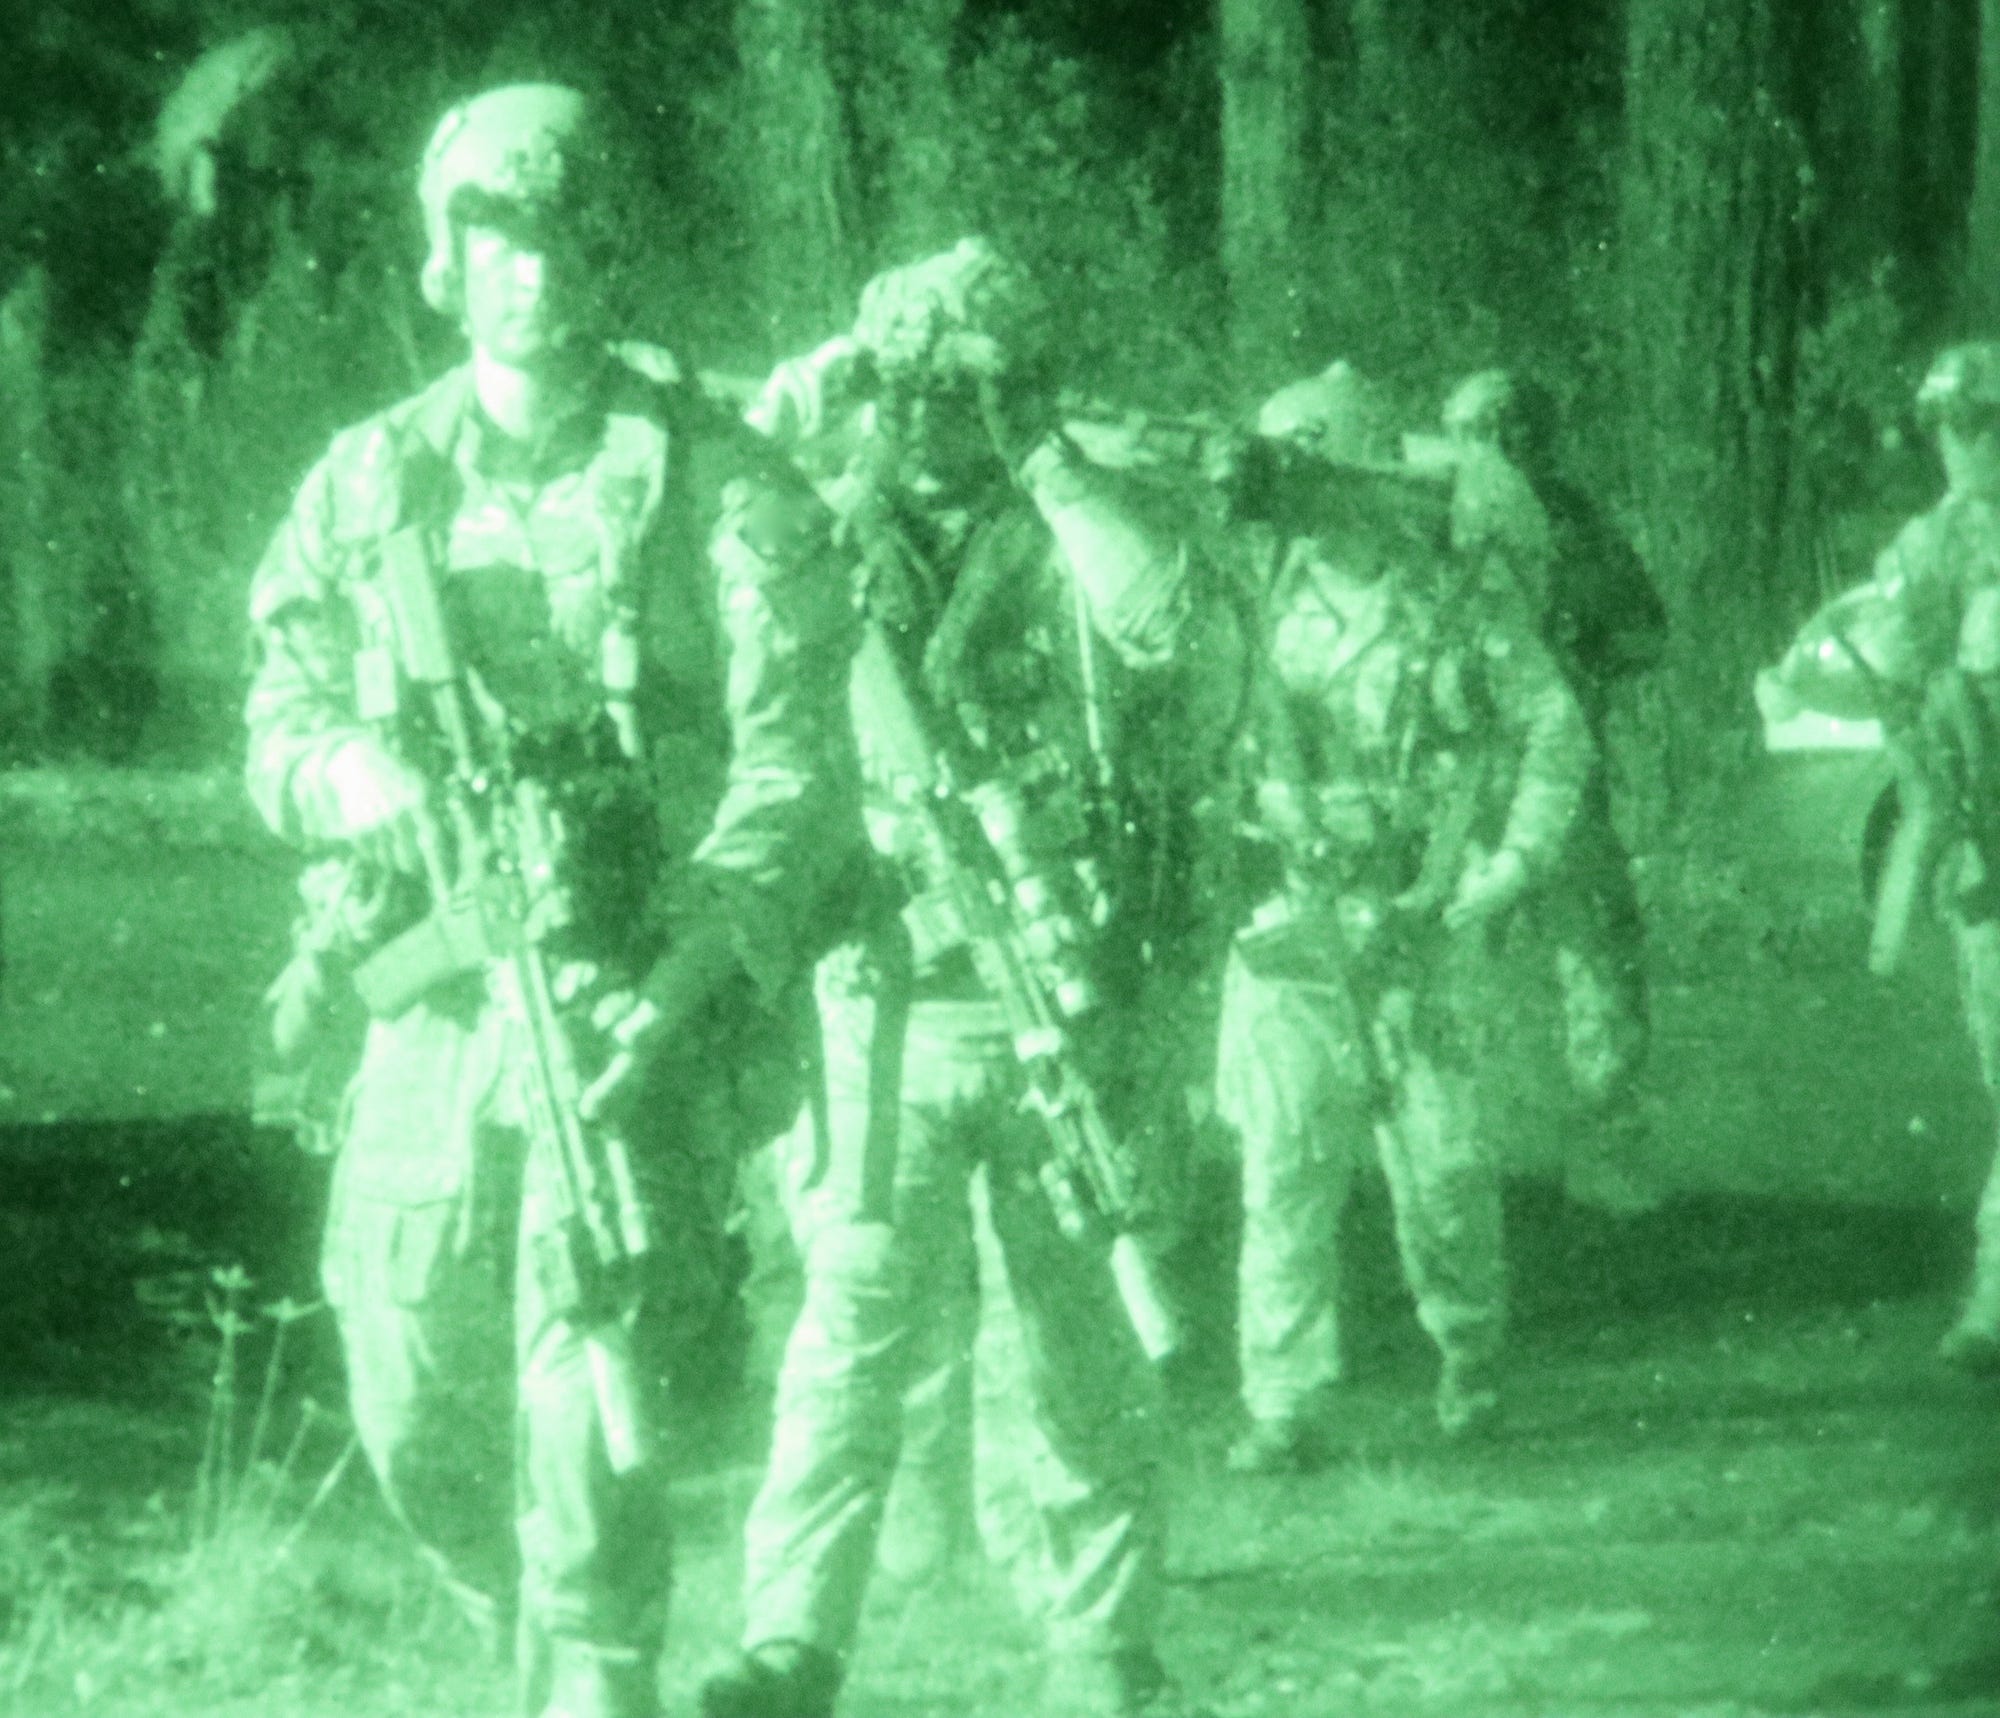 Army Special Forces Green Beret exercise in Hawaii